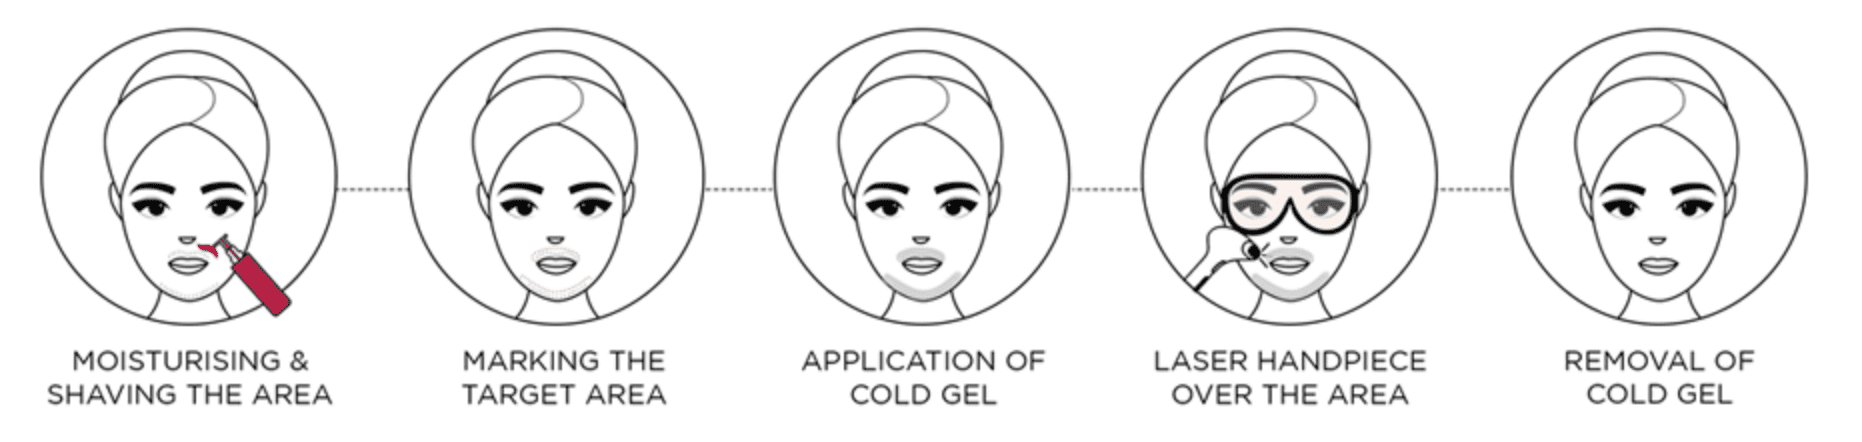 laser-hair-reduction-process